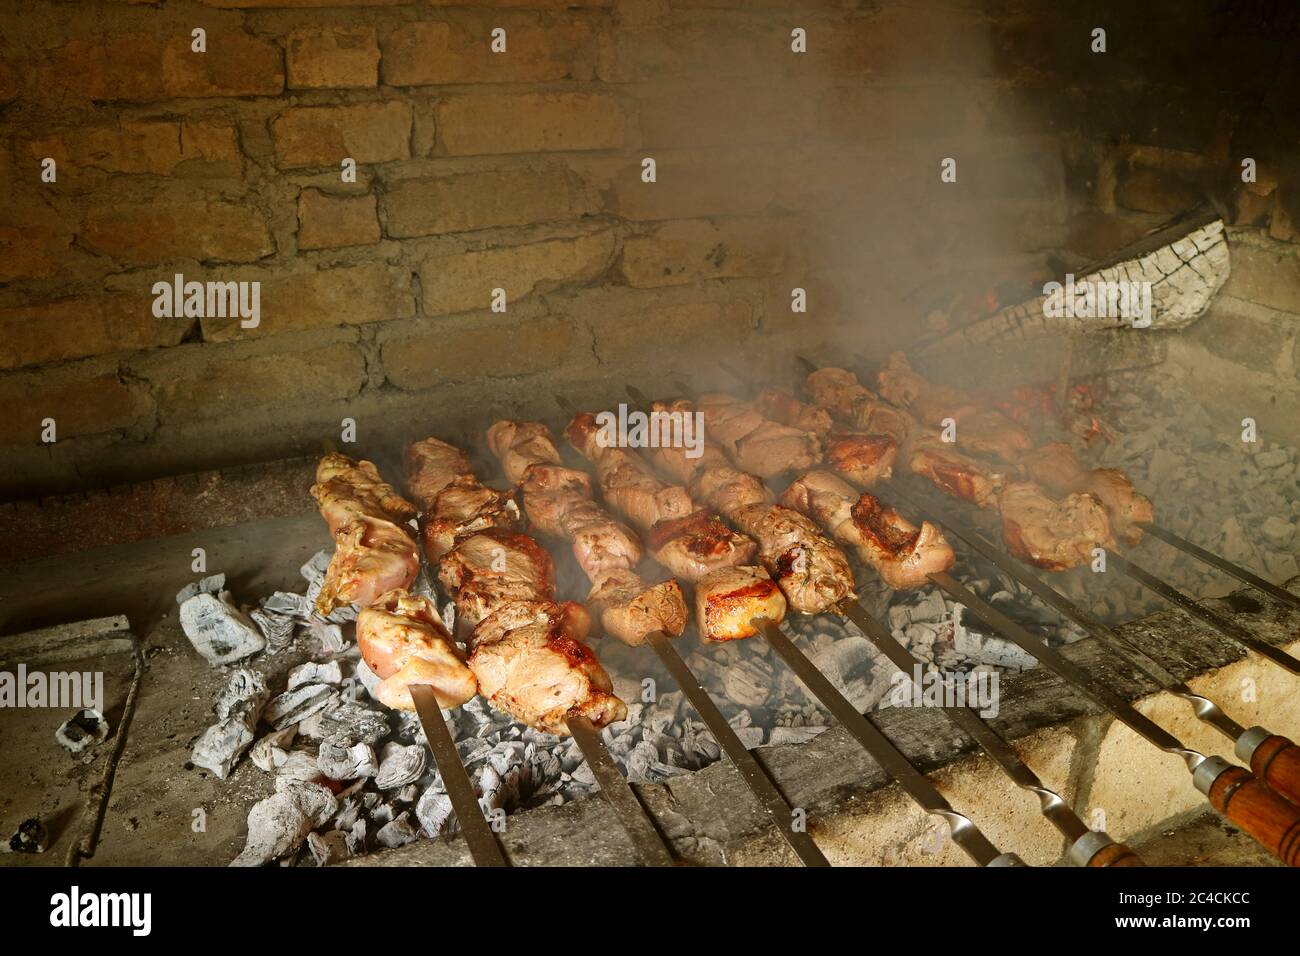 Closeup of Armenian Barbecue or Khorovats Being Grilled in a Traditional  Clay Oven, Lori Province, Armenia Stock Photo - Alamy